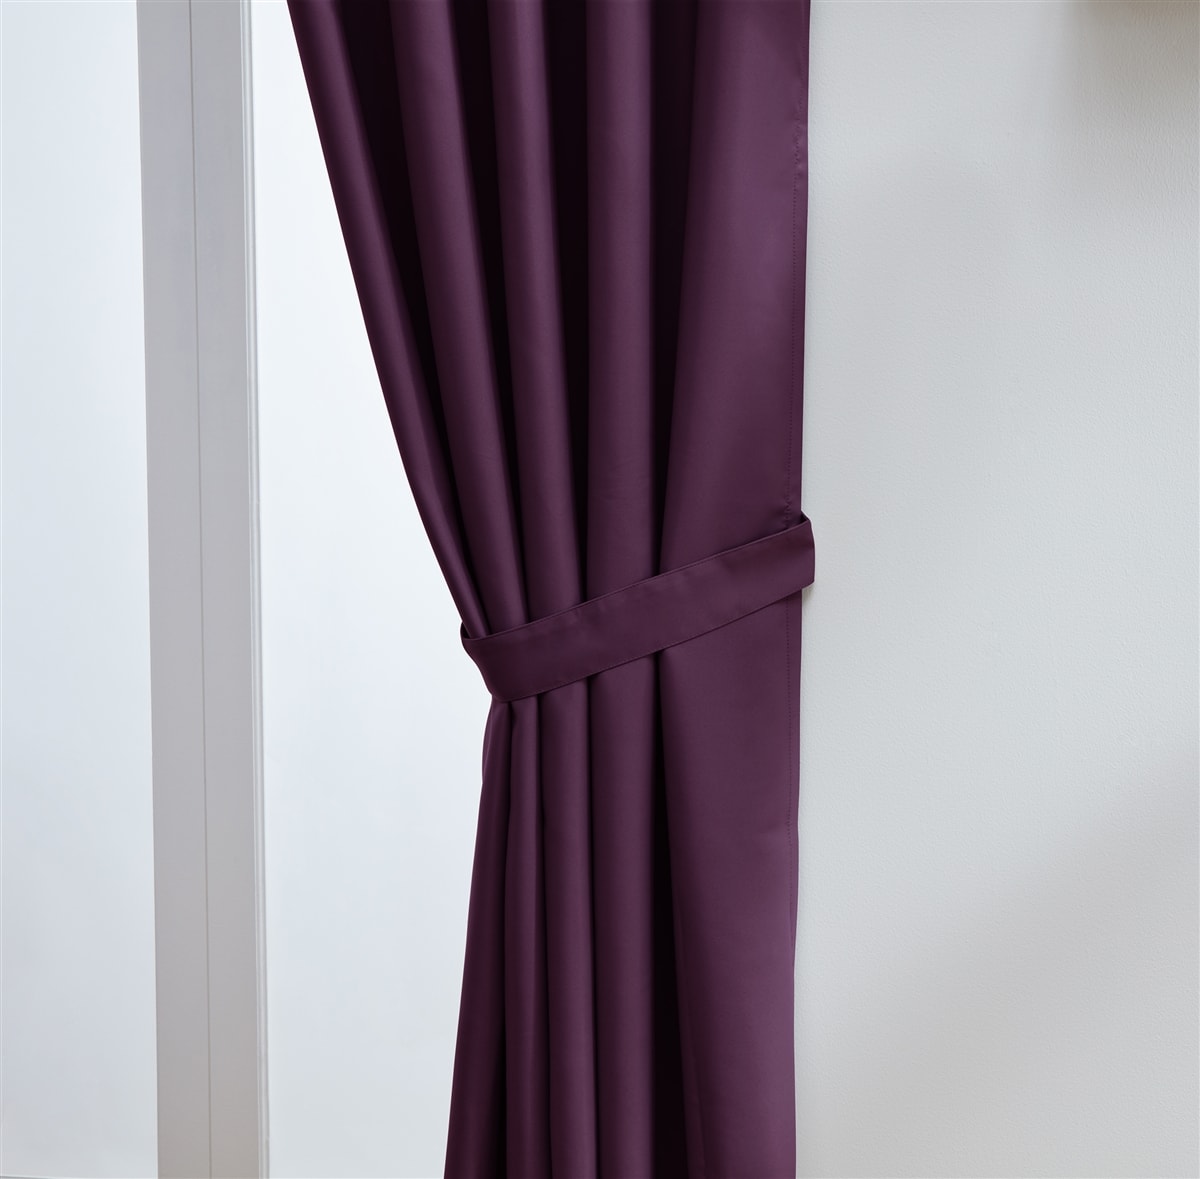 Thermal Blackout Ready Made Eyelet Curtains + Tie Backs (Aubergine)